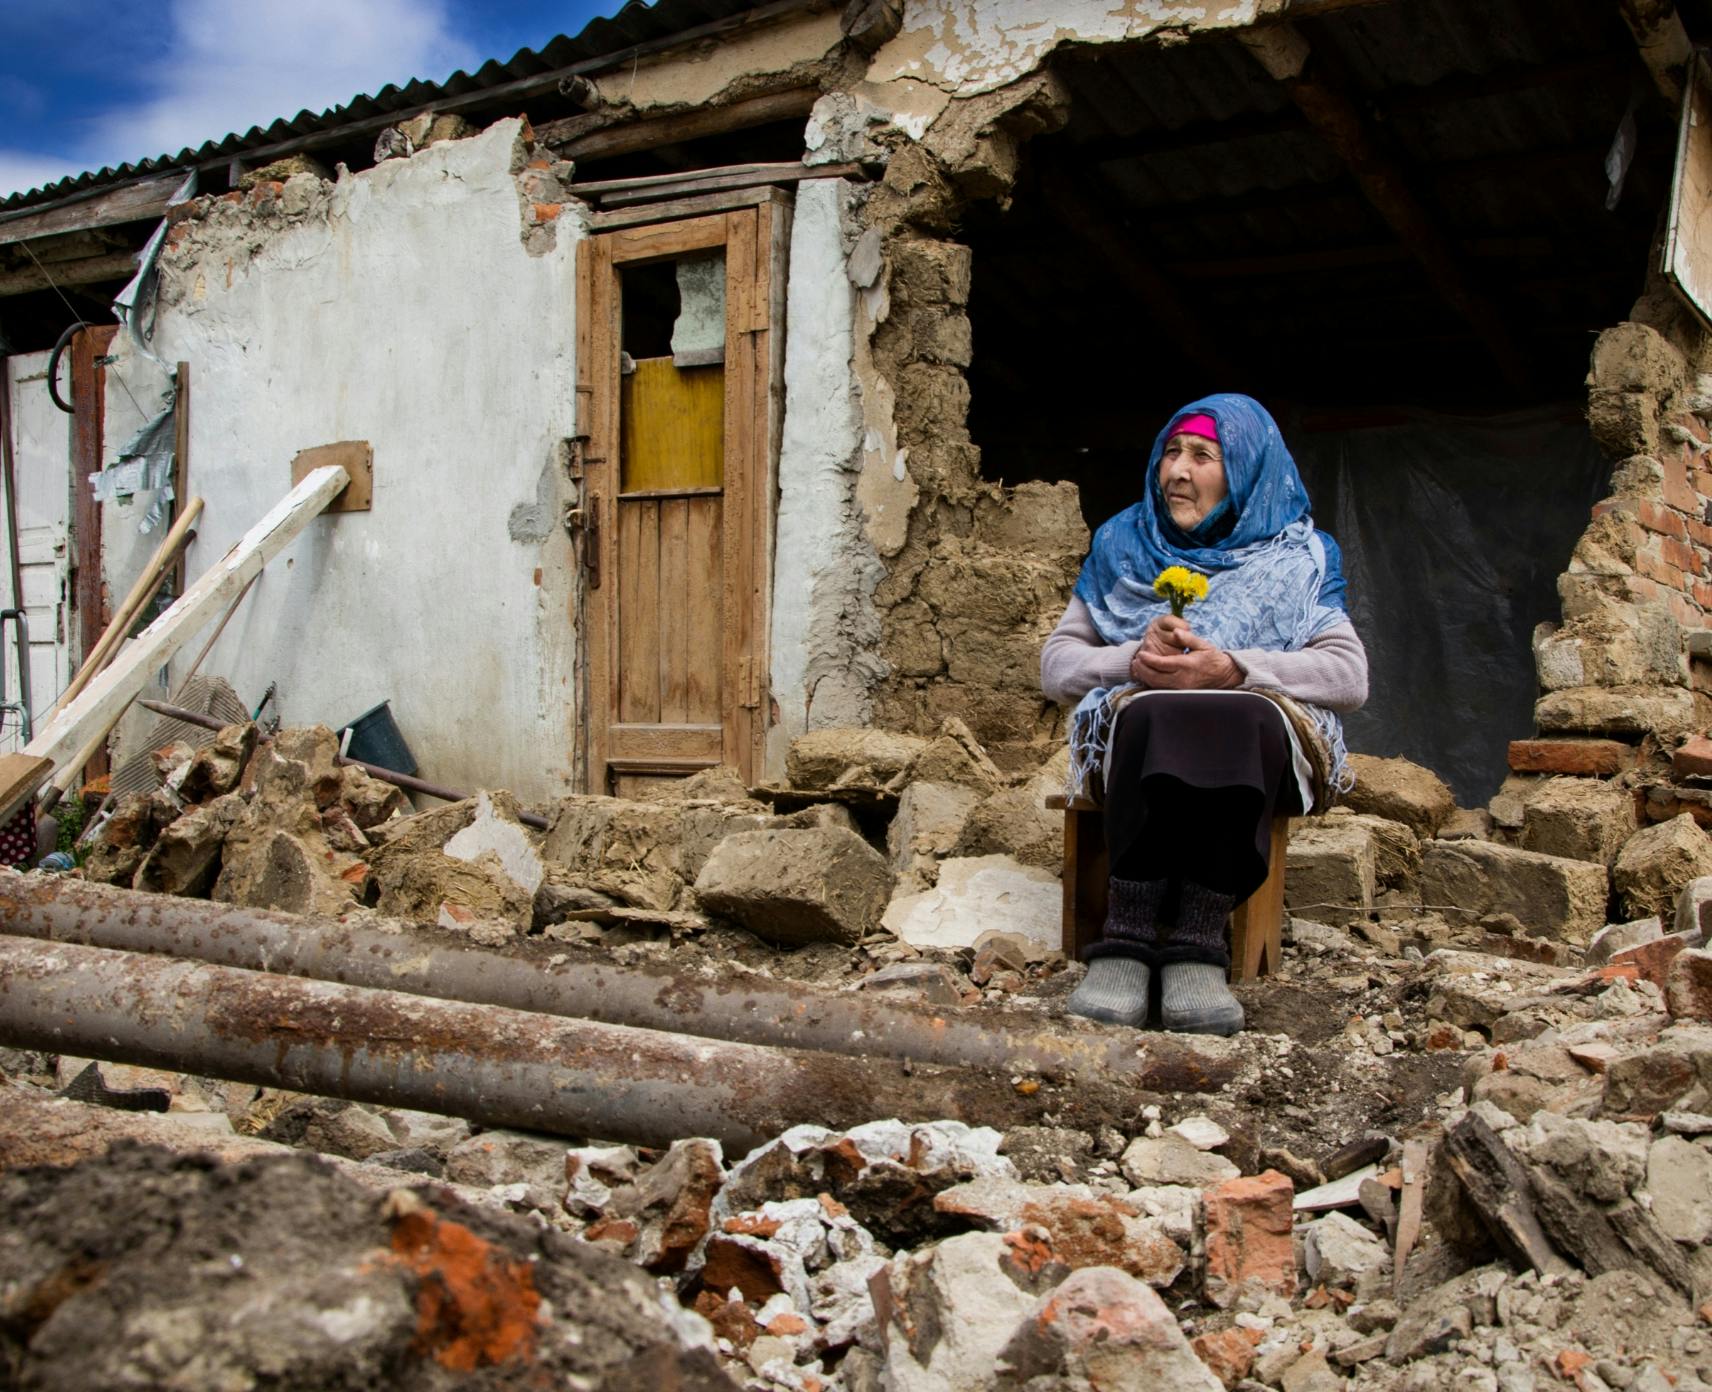 A woman prays in front of a war-torn house in Ukraine.